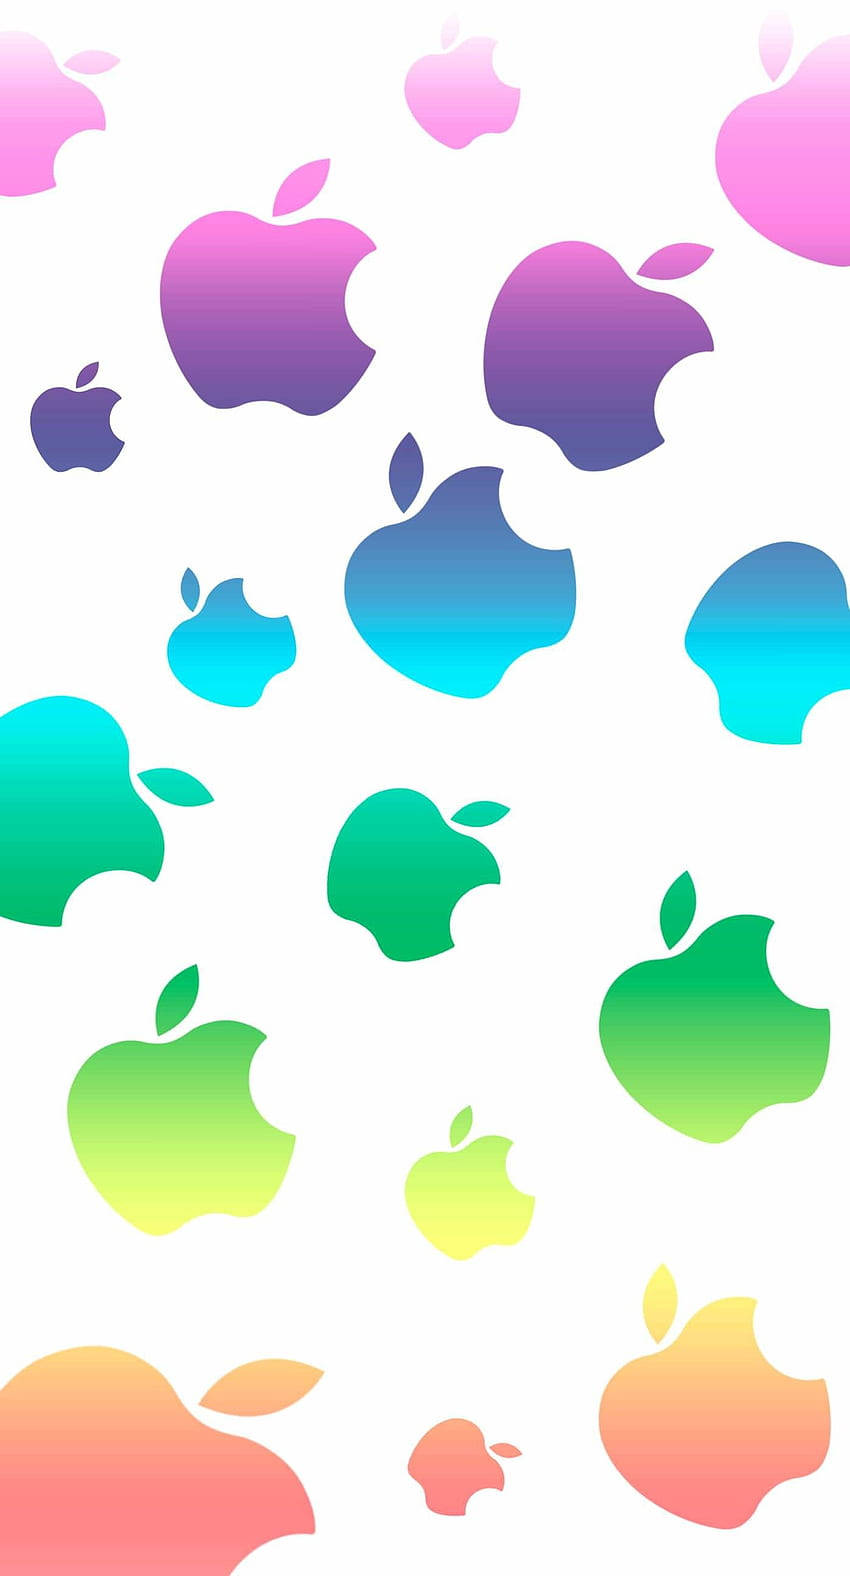 Colorful Iphone Apple Pattern Wallpaper